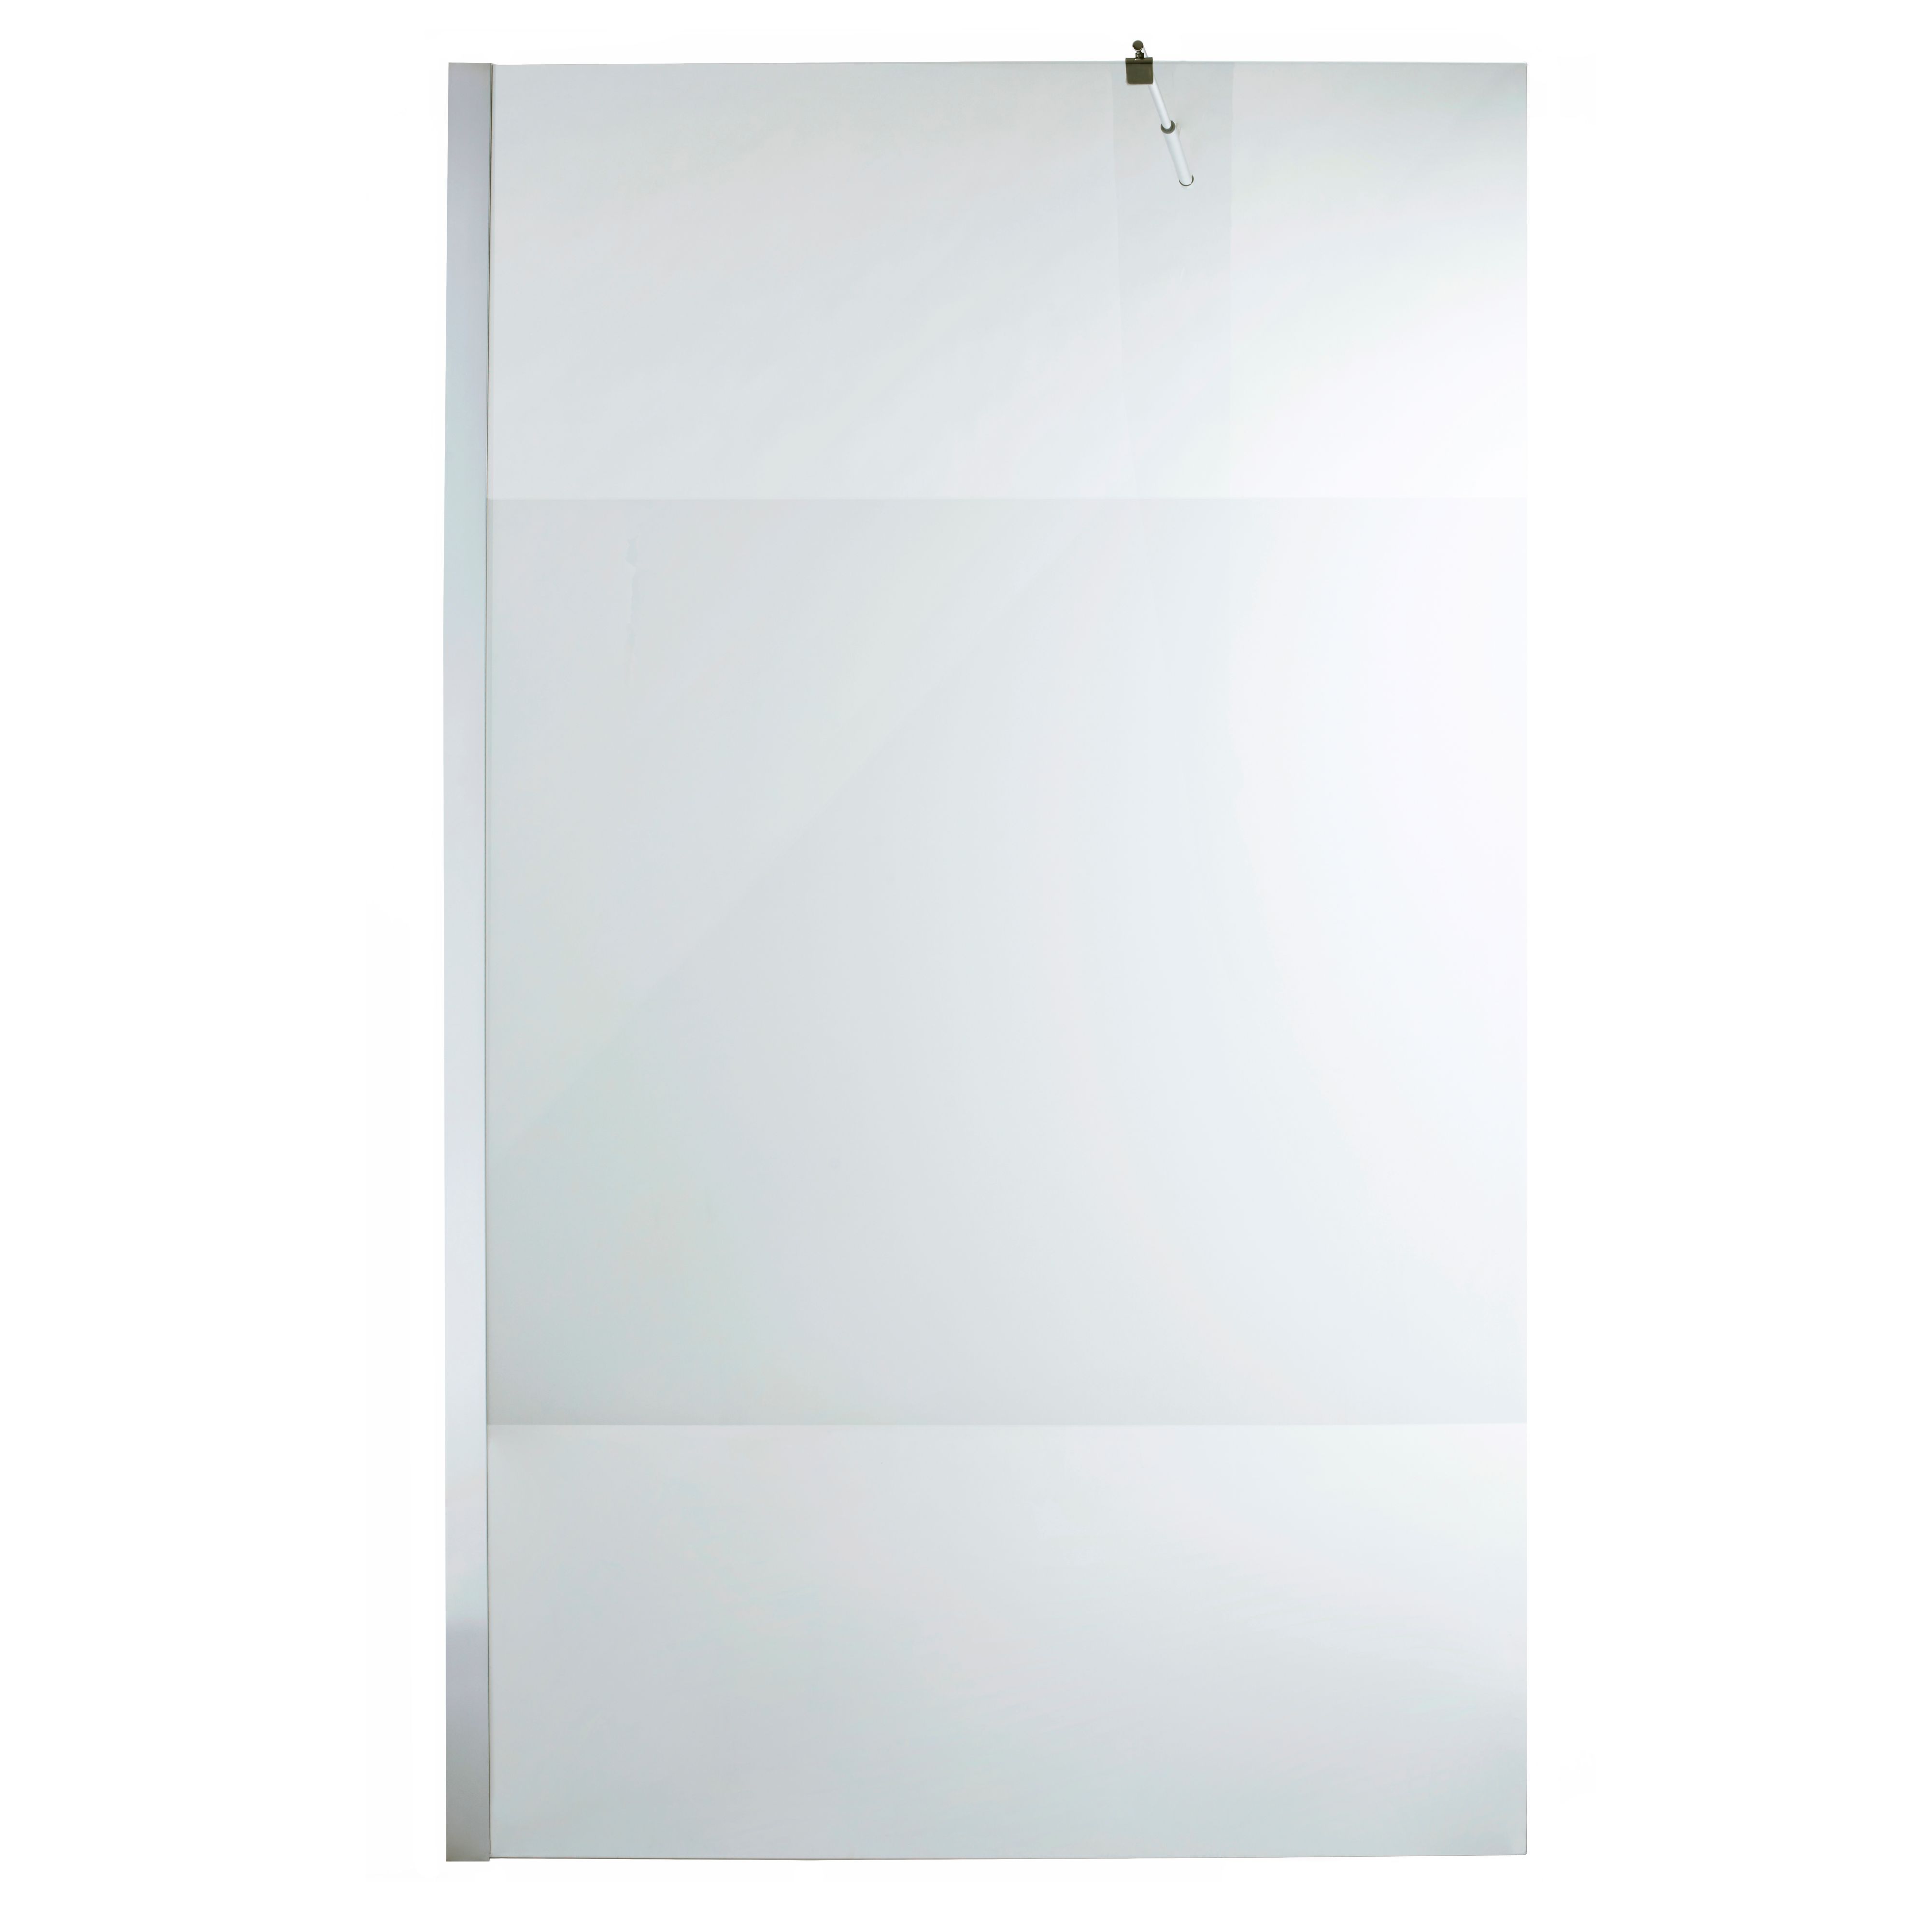 Cooke & Lewis Onega Chrome effect Frosted Striped Walk-in Wet room glass screen (H)195cm (W)120cm